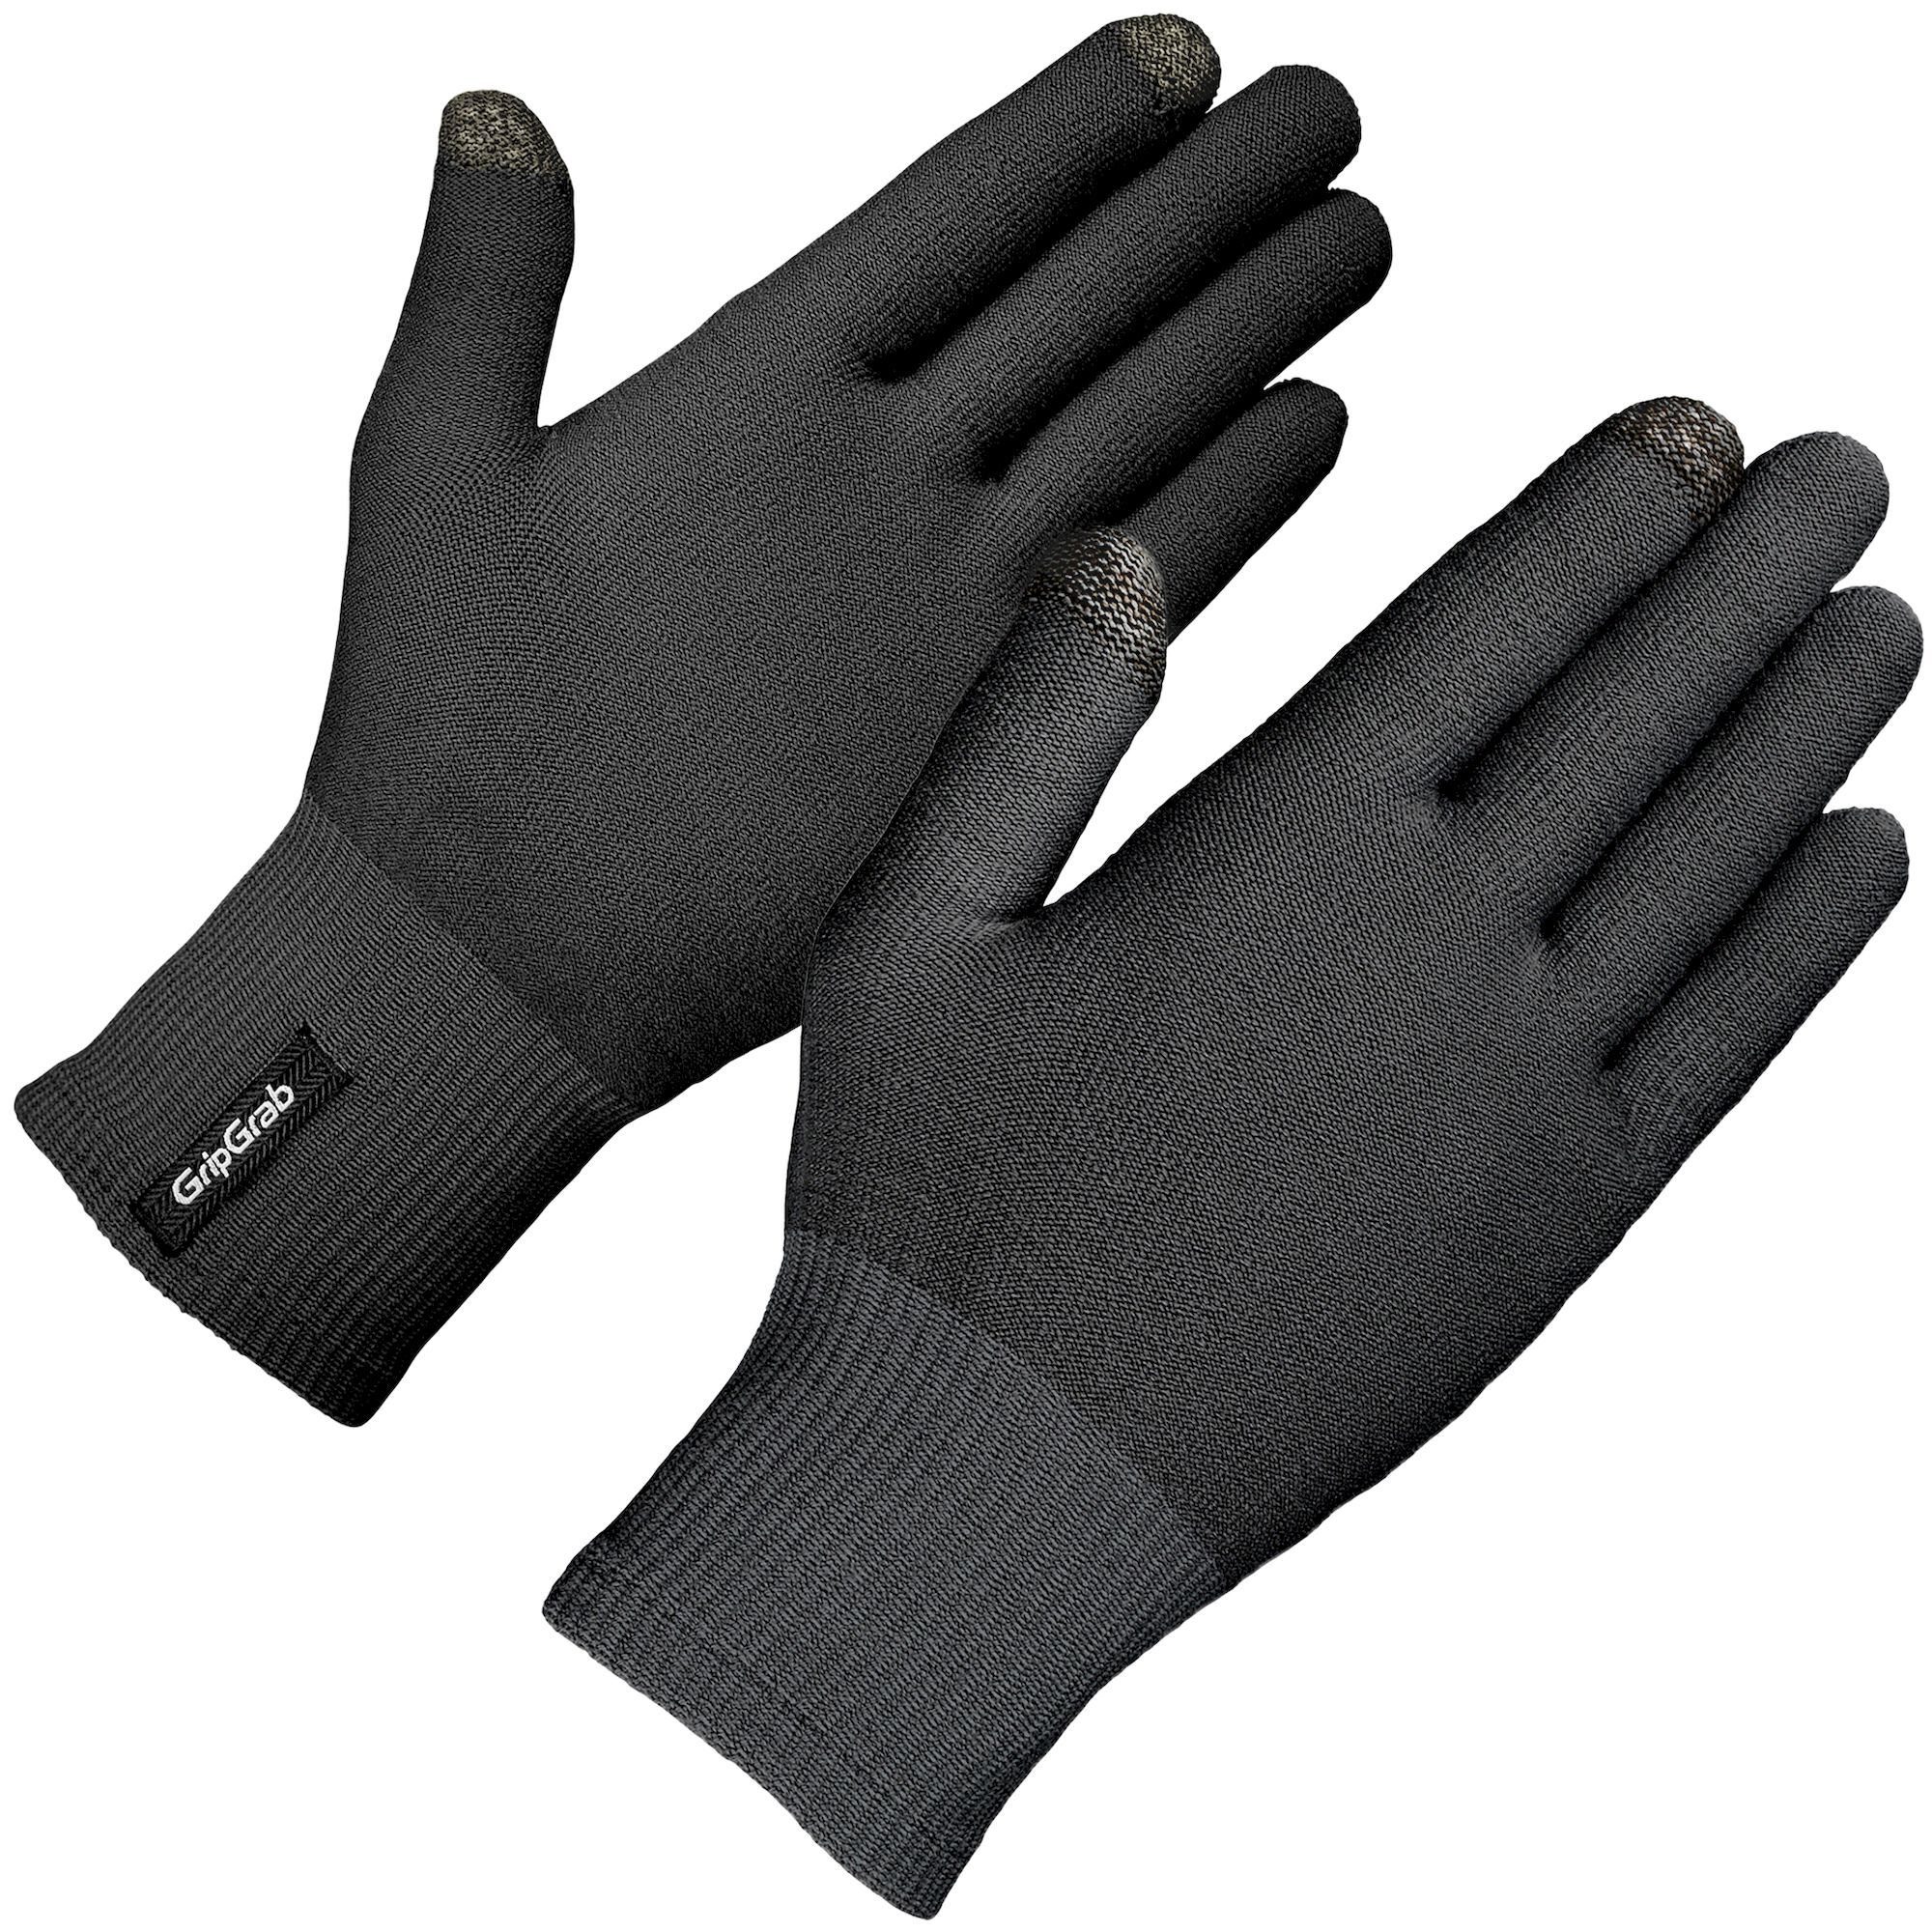 Review: GripGrab Nordic 2 Windproof Deep Winter Lobster Gloves